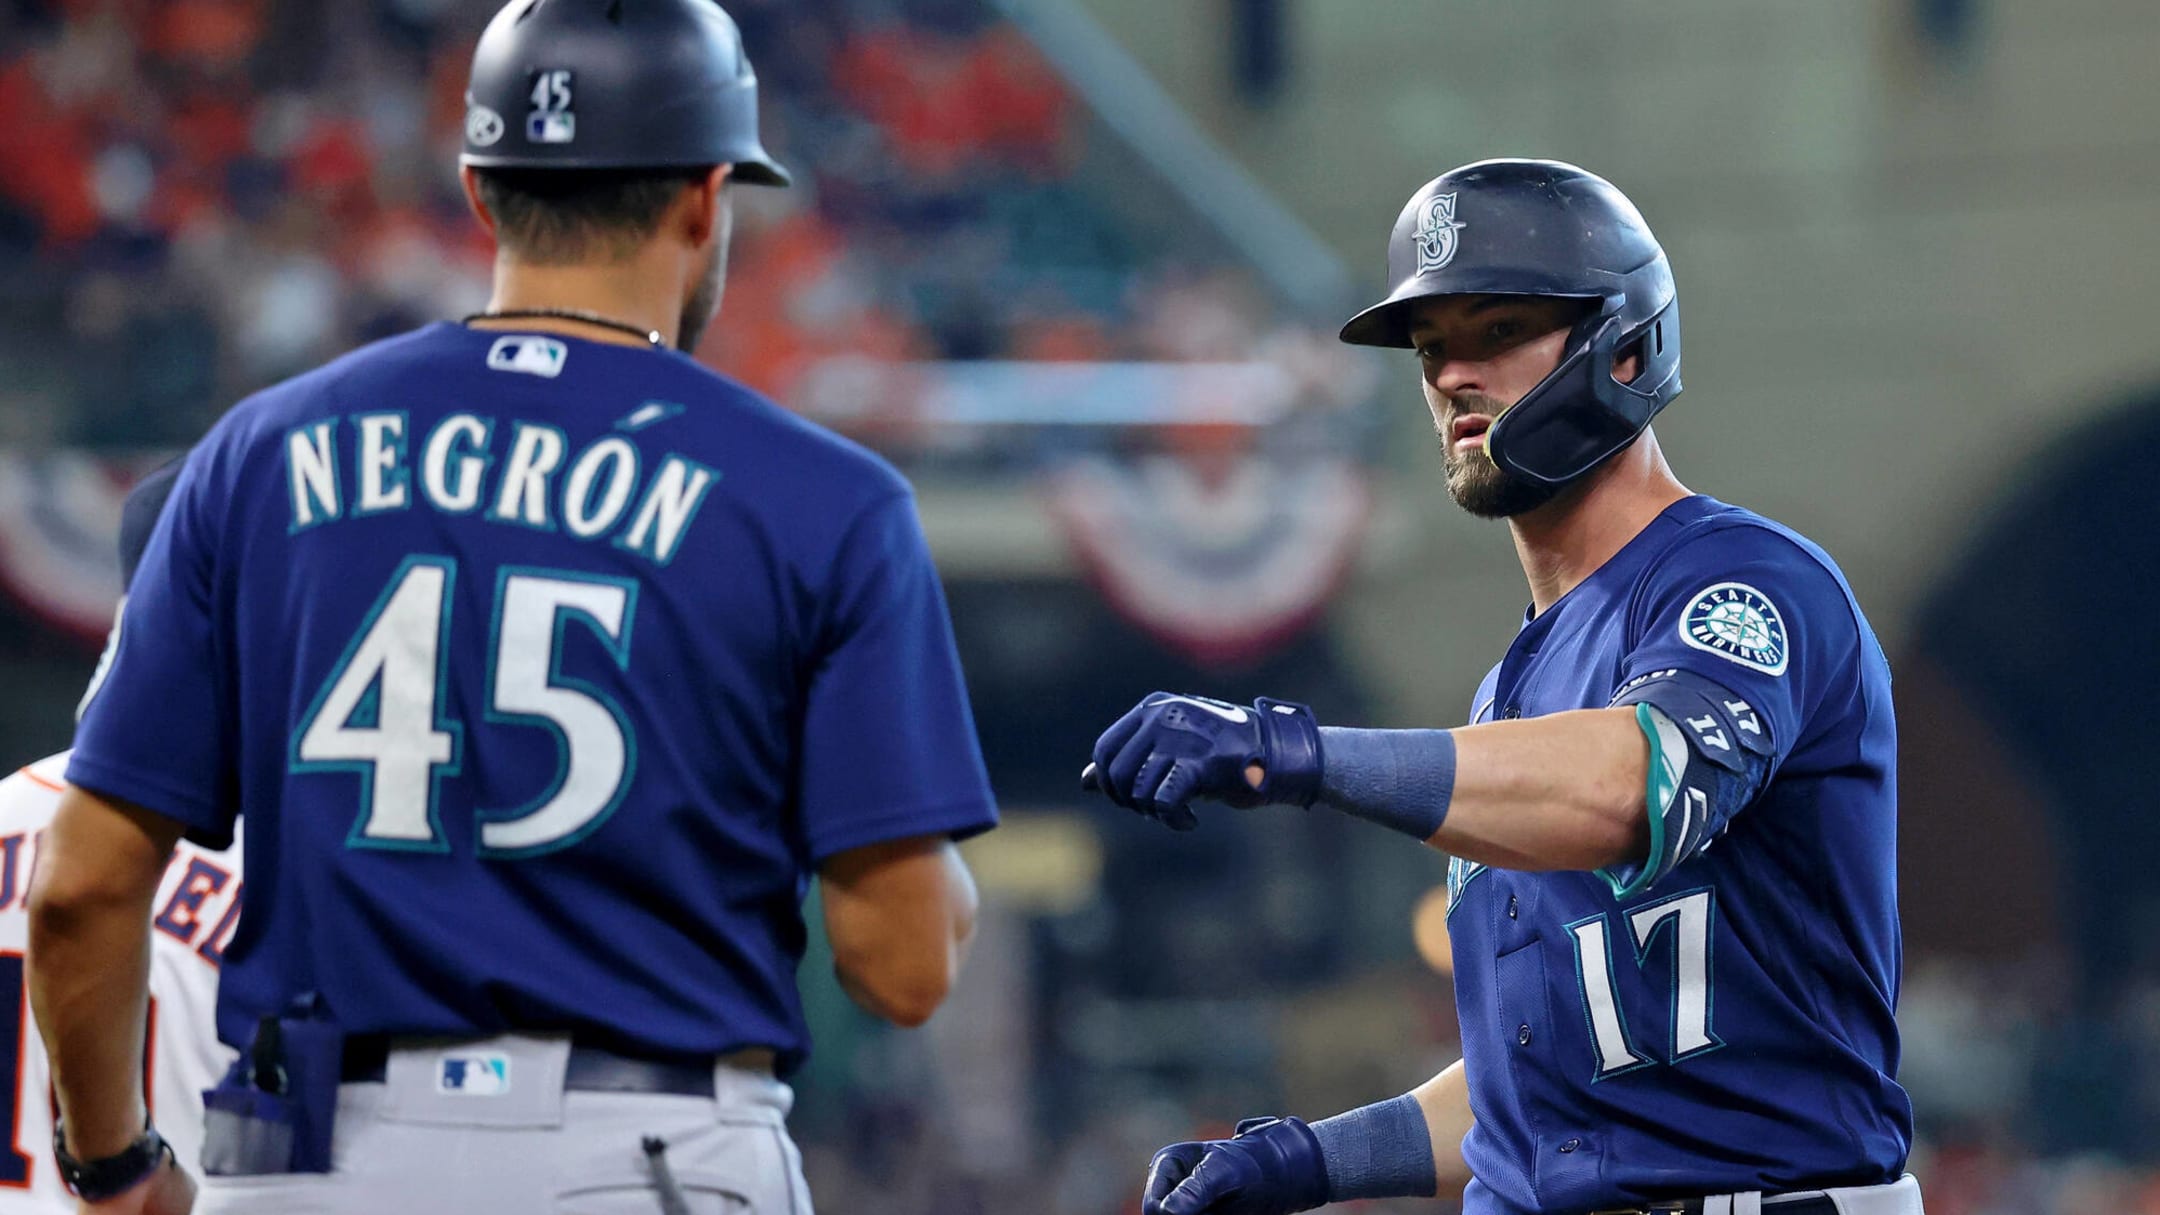 Mitch Haniger and the best rookie seasons in Mariners history